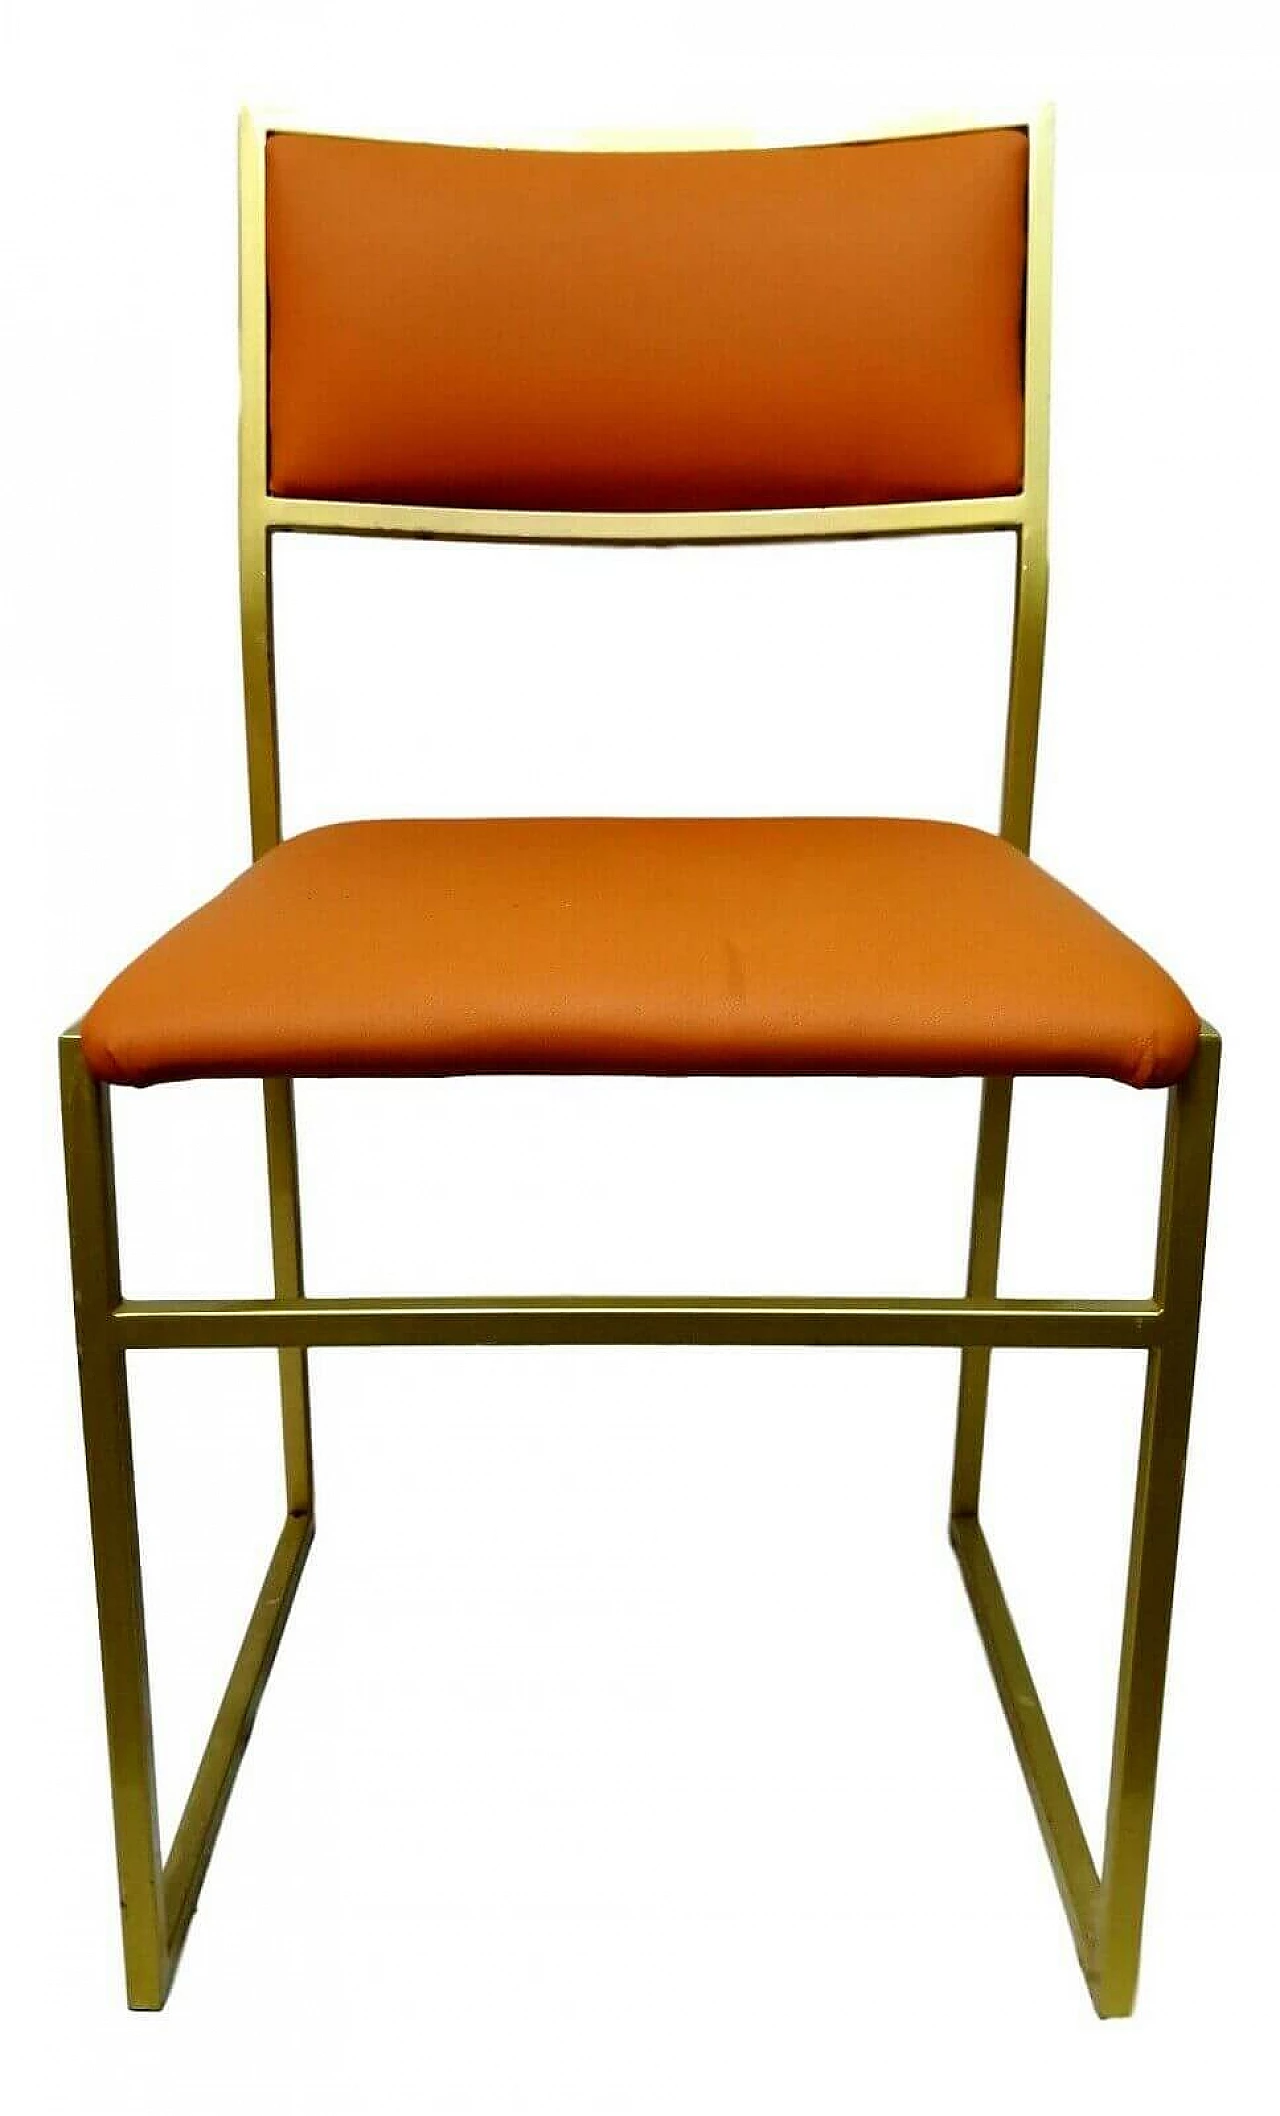 Metal chair and apricot-colored seat, 70s 1166227